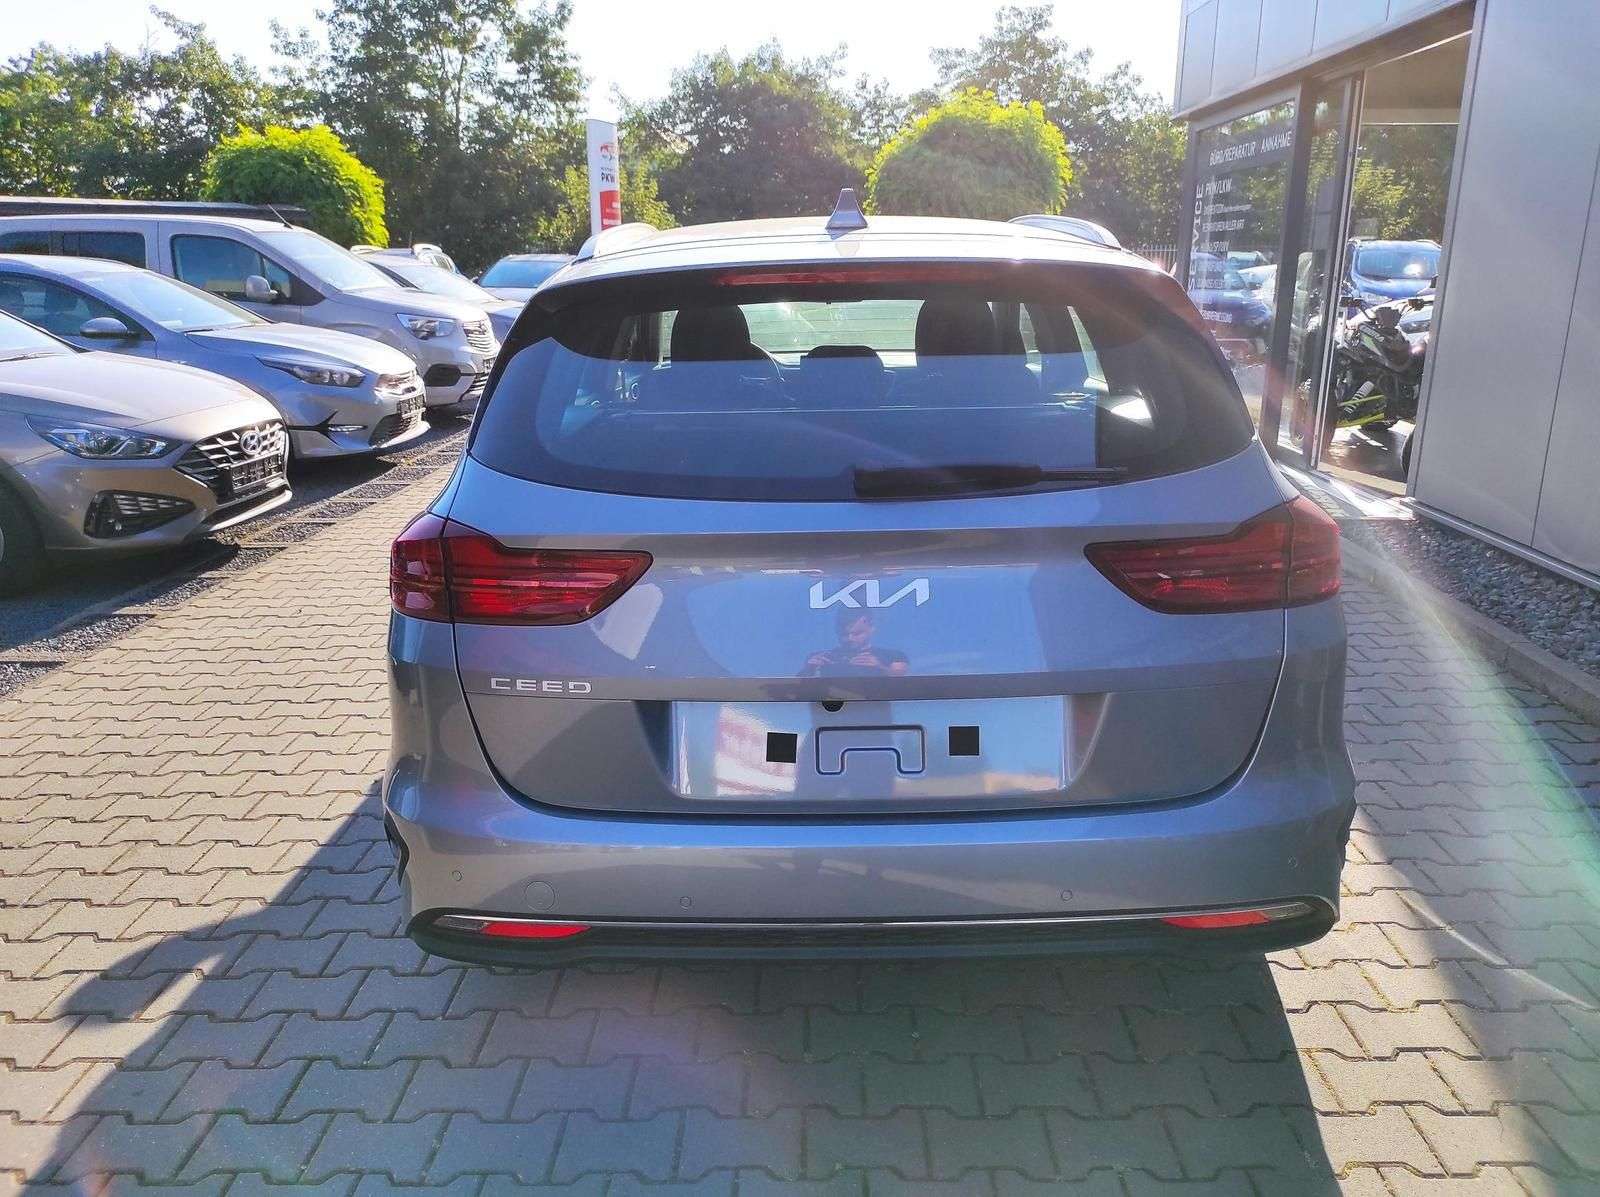 Kia Ceed SW / cee'd SW Station wagon in Silver used in Polch for € 23,950.-